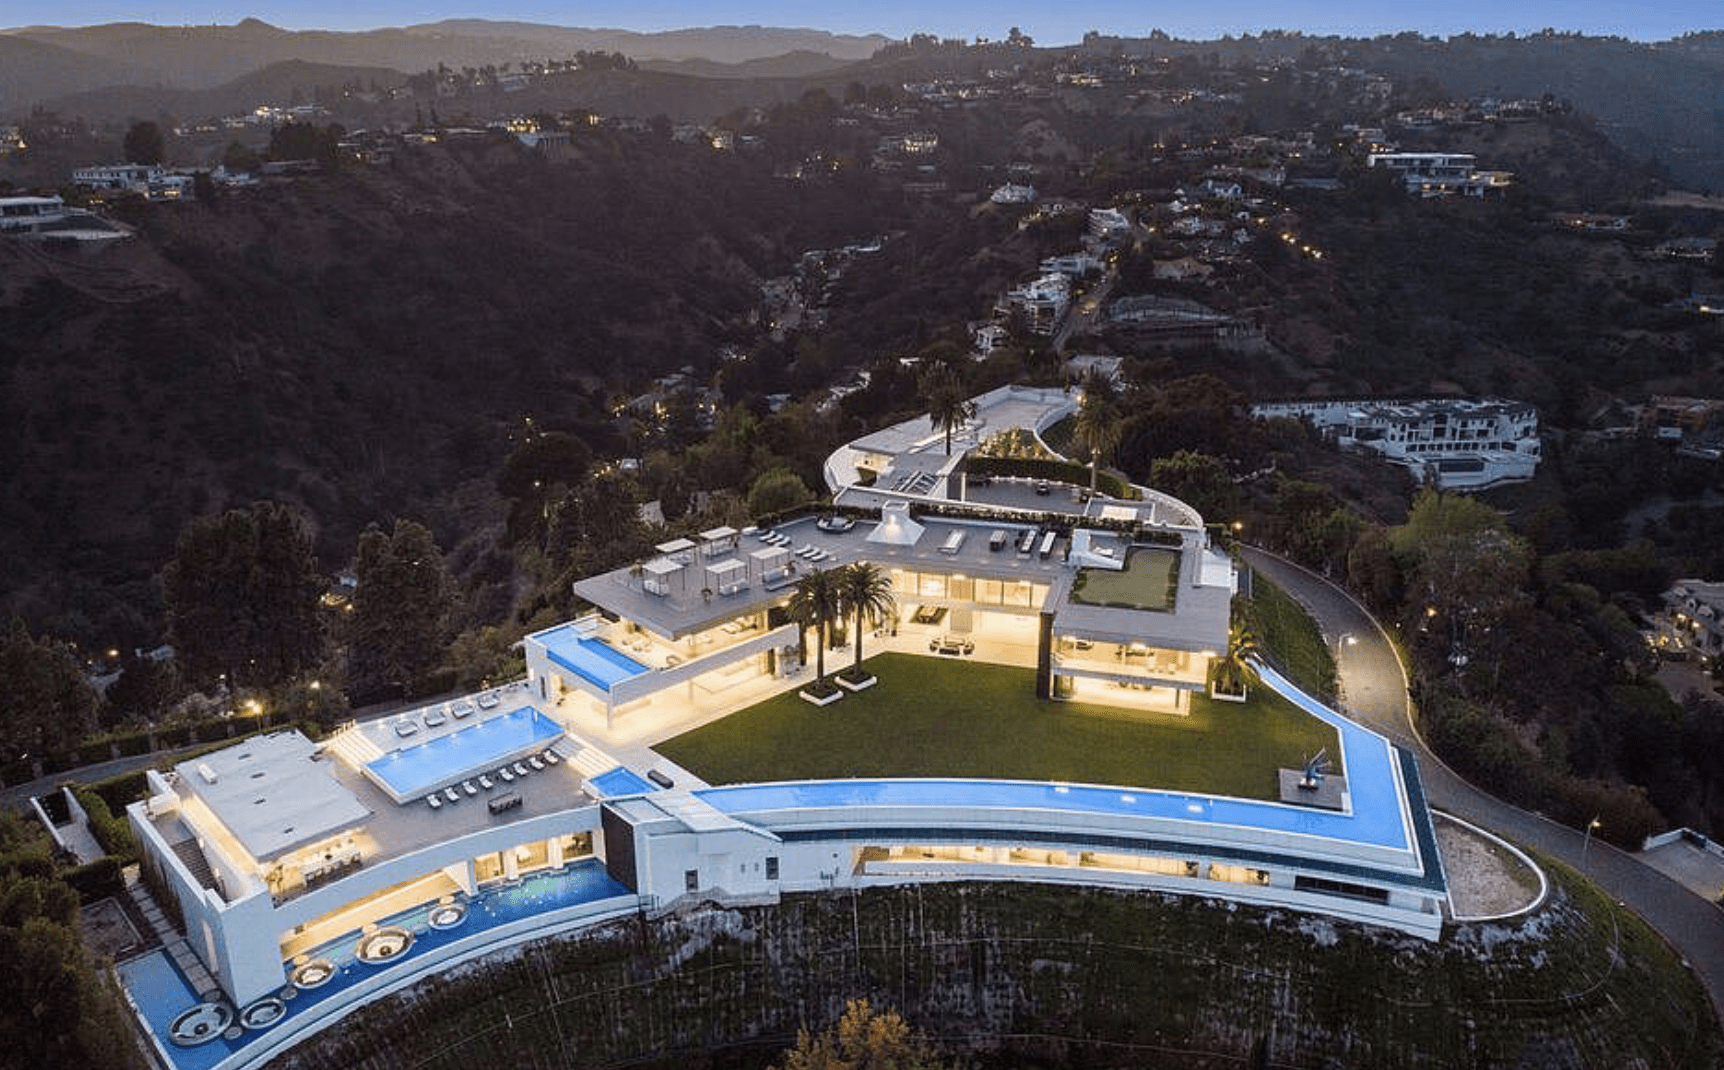 Welcome to $49 MILLION MANSION - my WISH house Bel Air